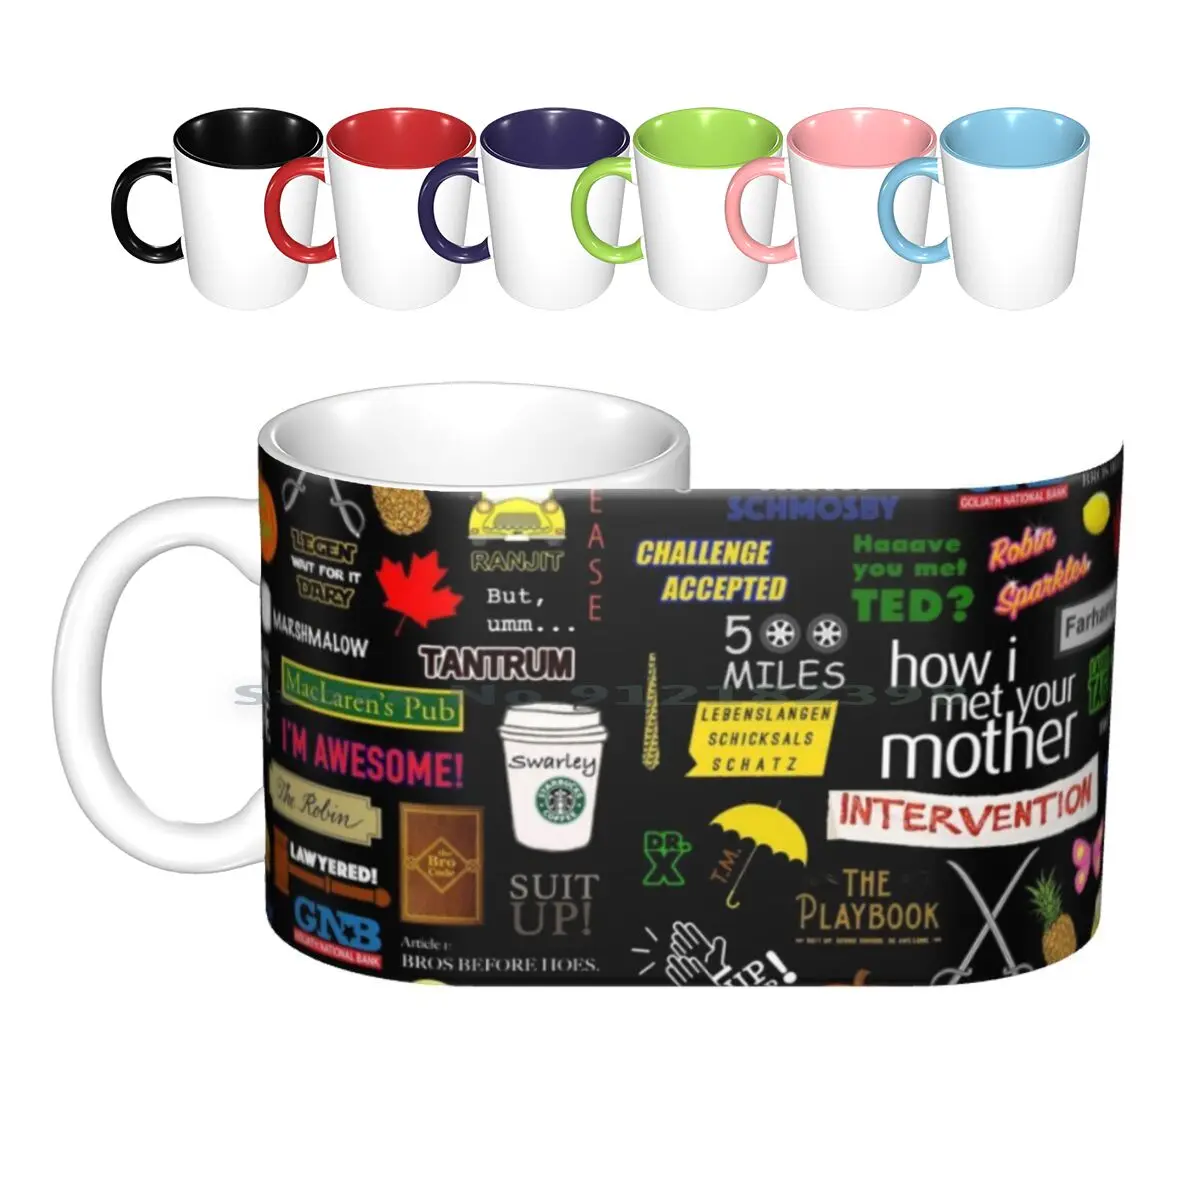 How I Met Your Mother | Himym | Tv Show | Collage Ceramic Mugs Coffee Cups Milk Tea Mug How I Met Your Mother Himym Barney